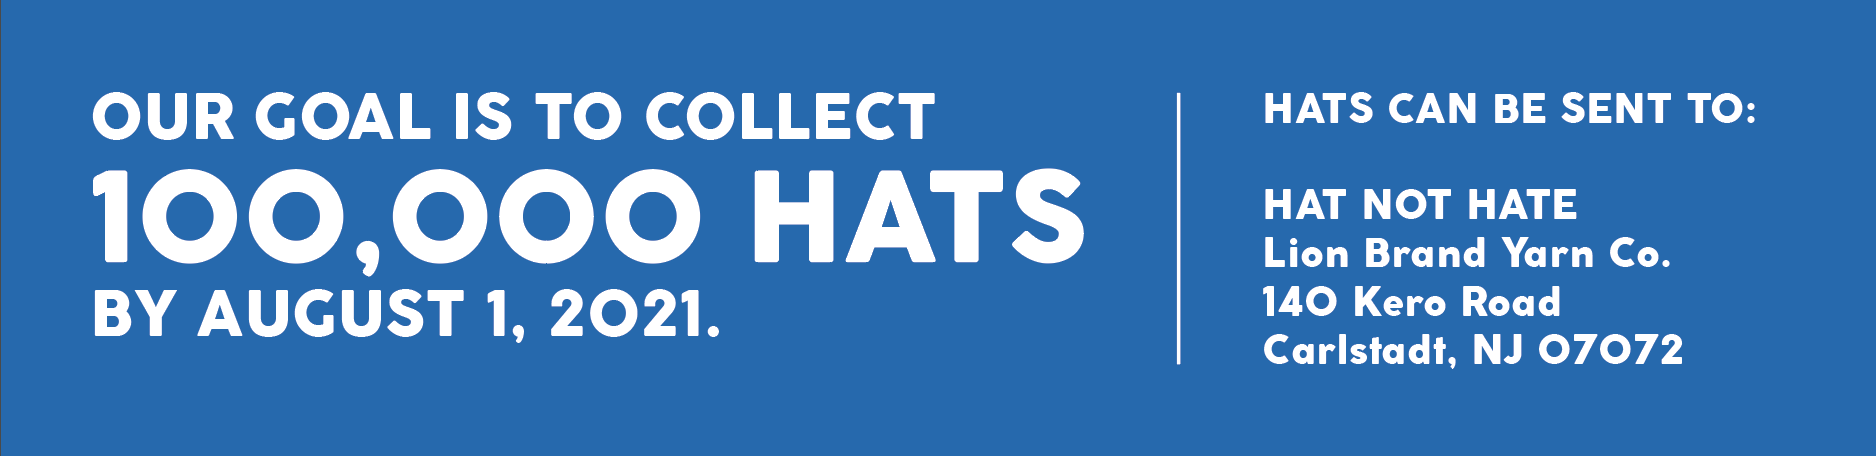 Graphic - goal of 100,000 hats by august 1 2021